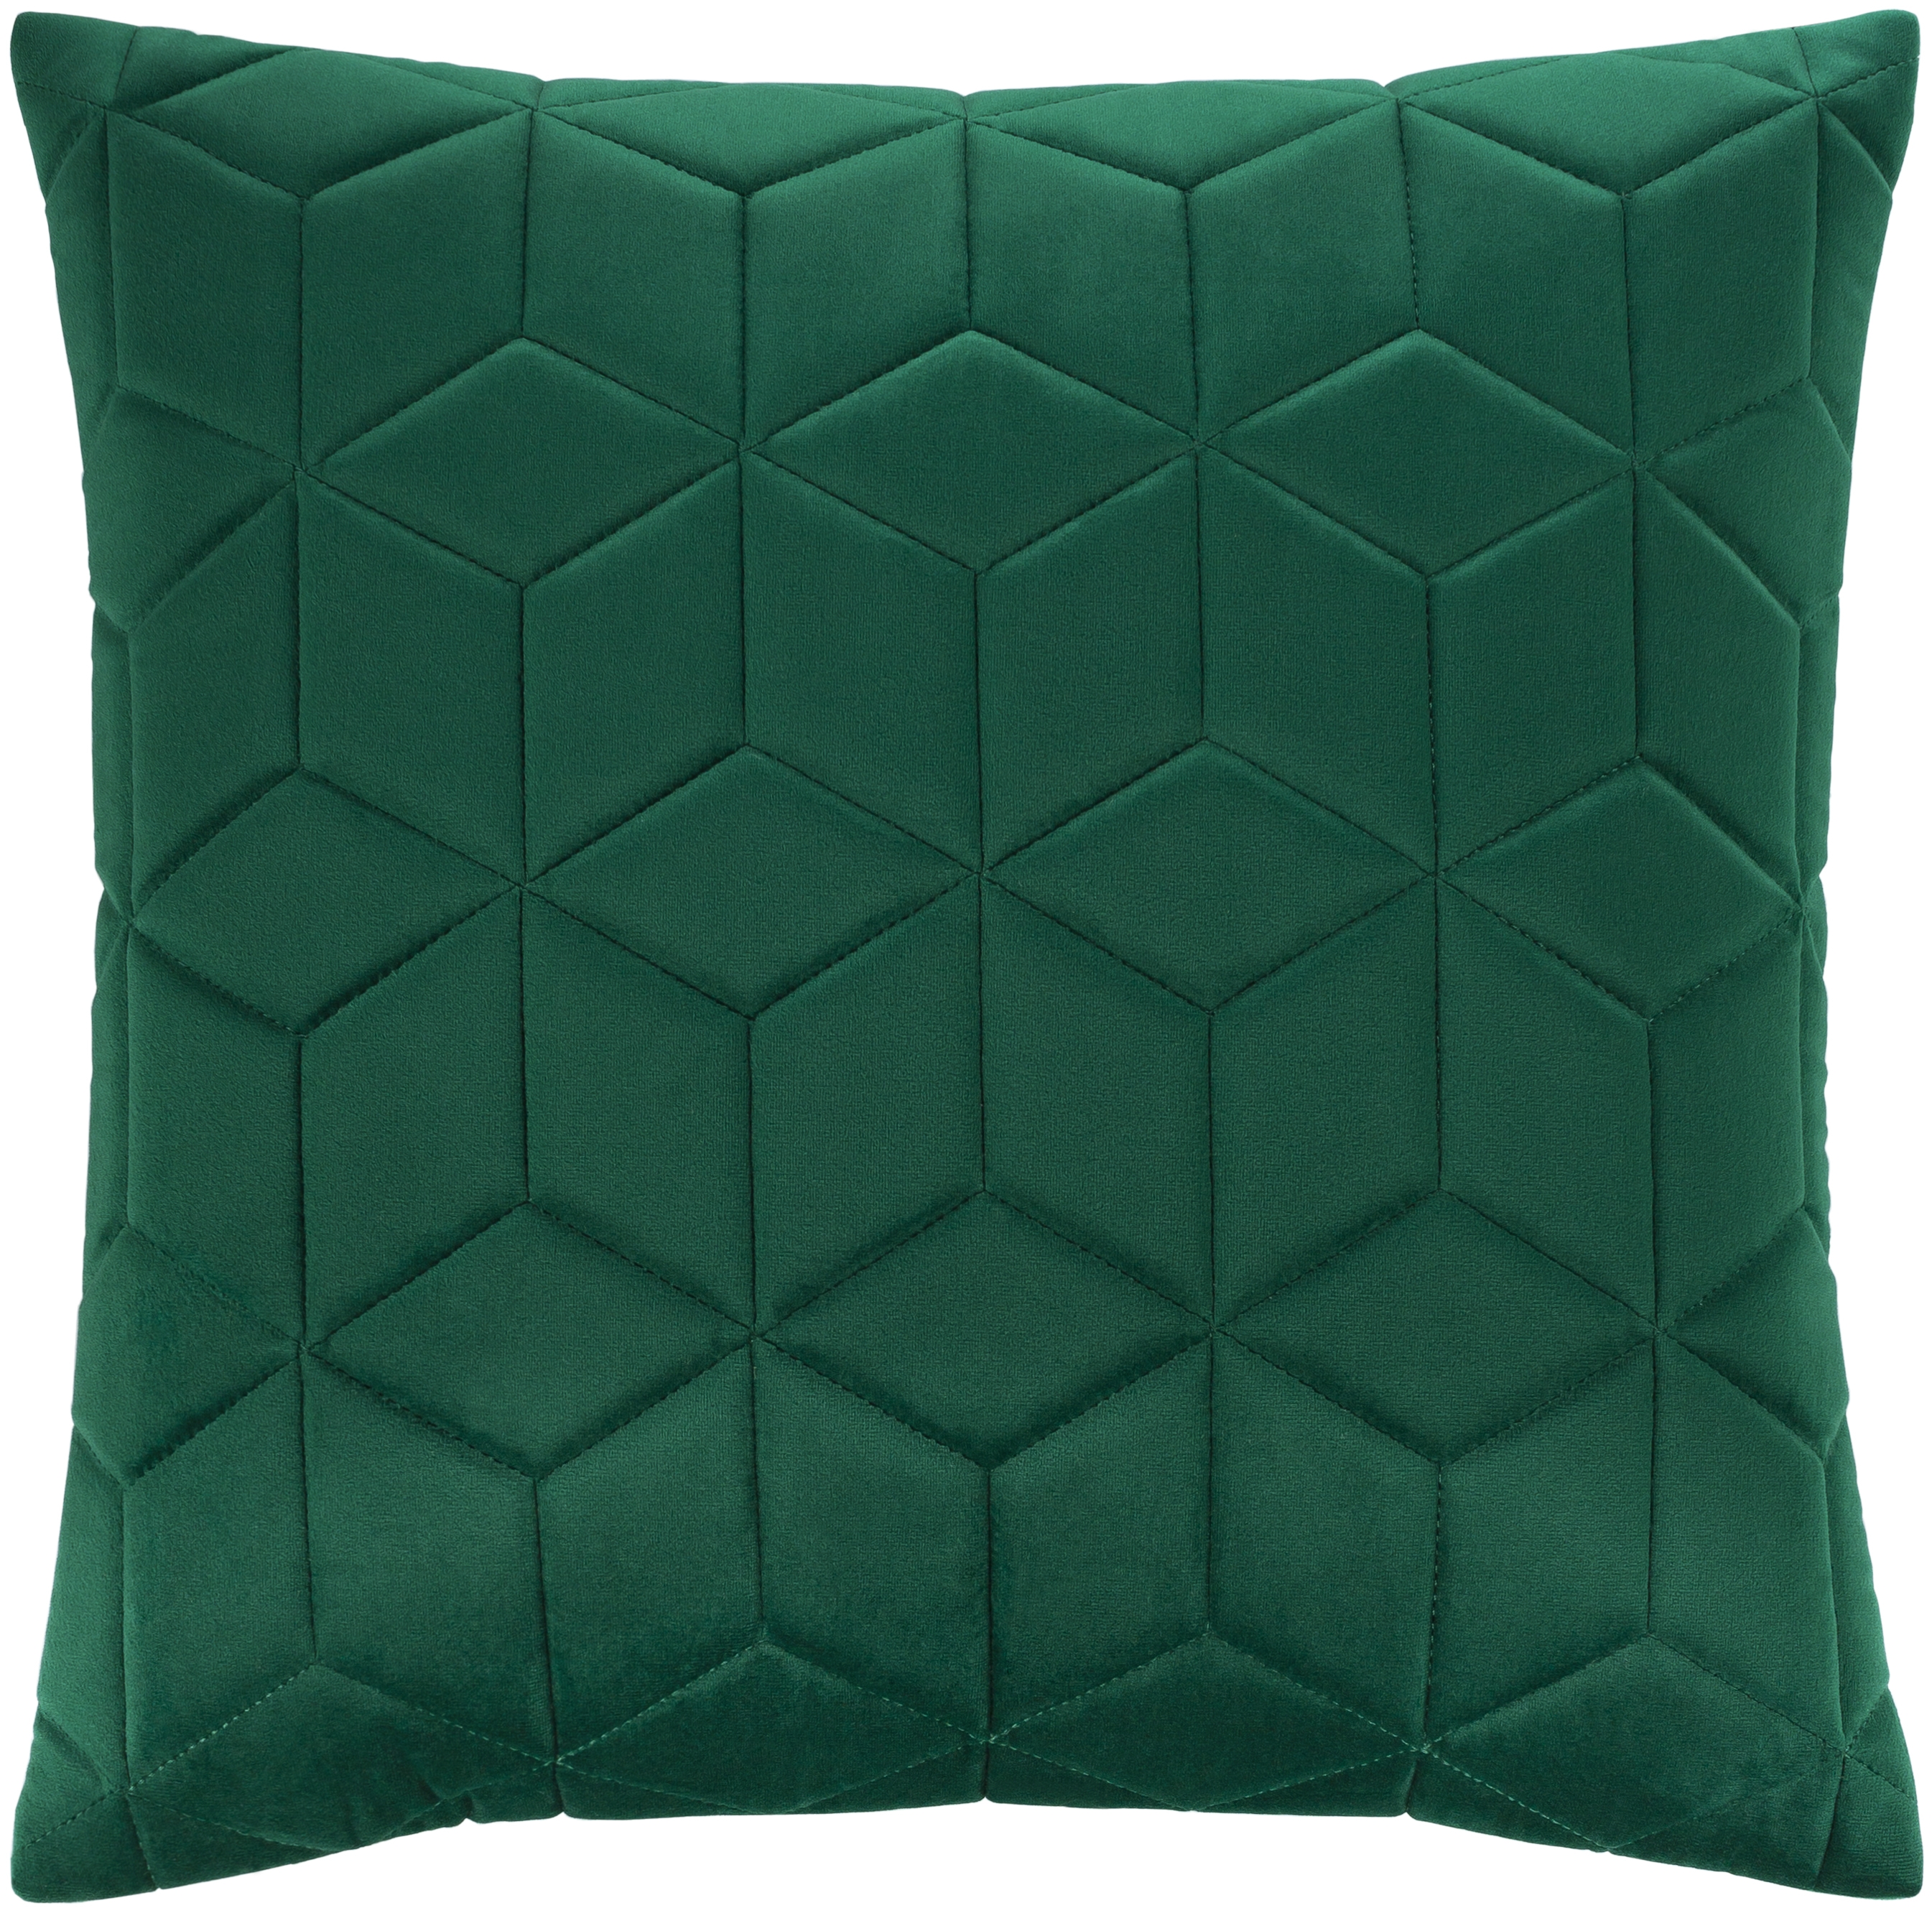 Calista - CIA-009 - 18" x 18" - pillow cover only - Image 0